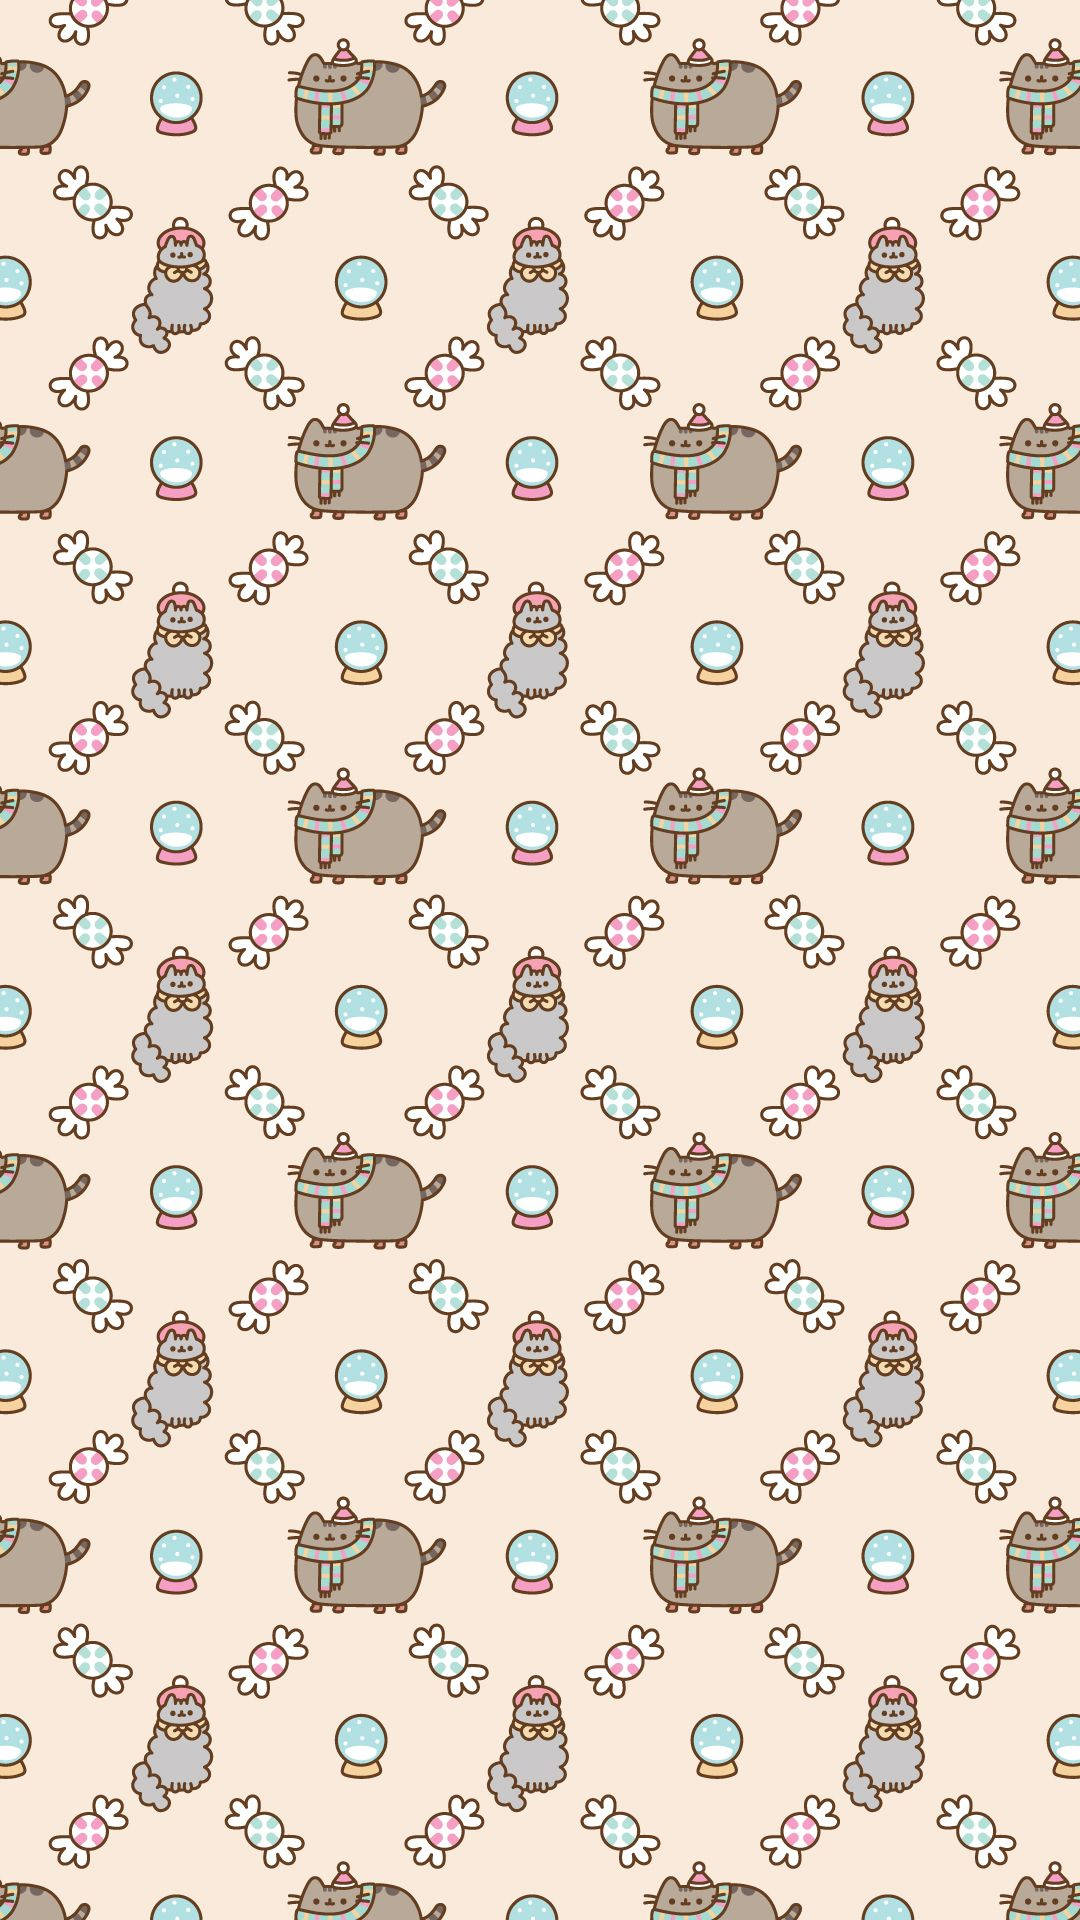 1080X1920 Pusheen Wallpaper and Background